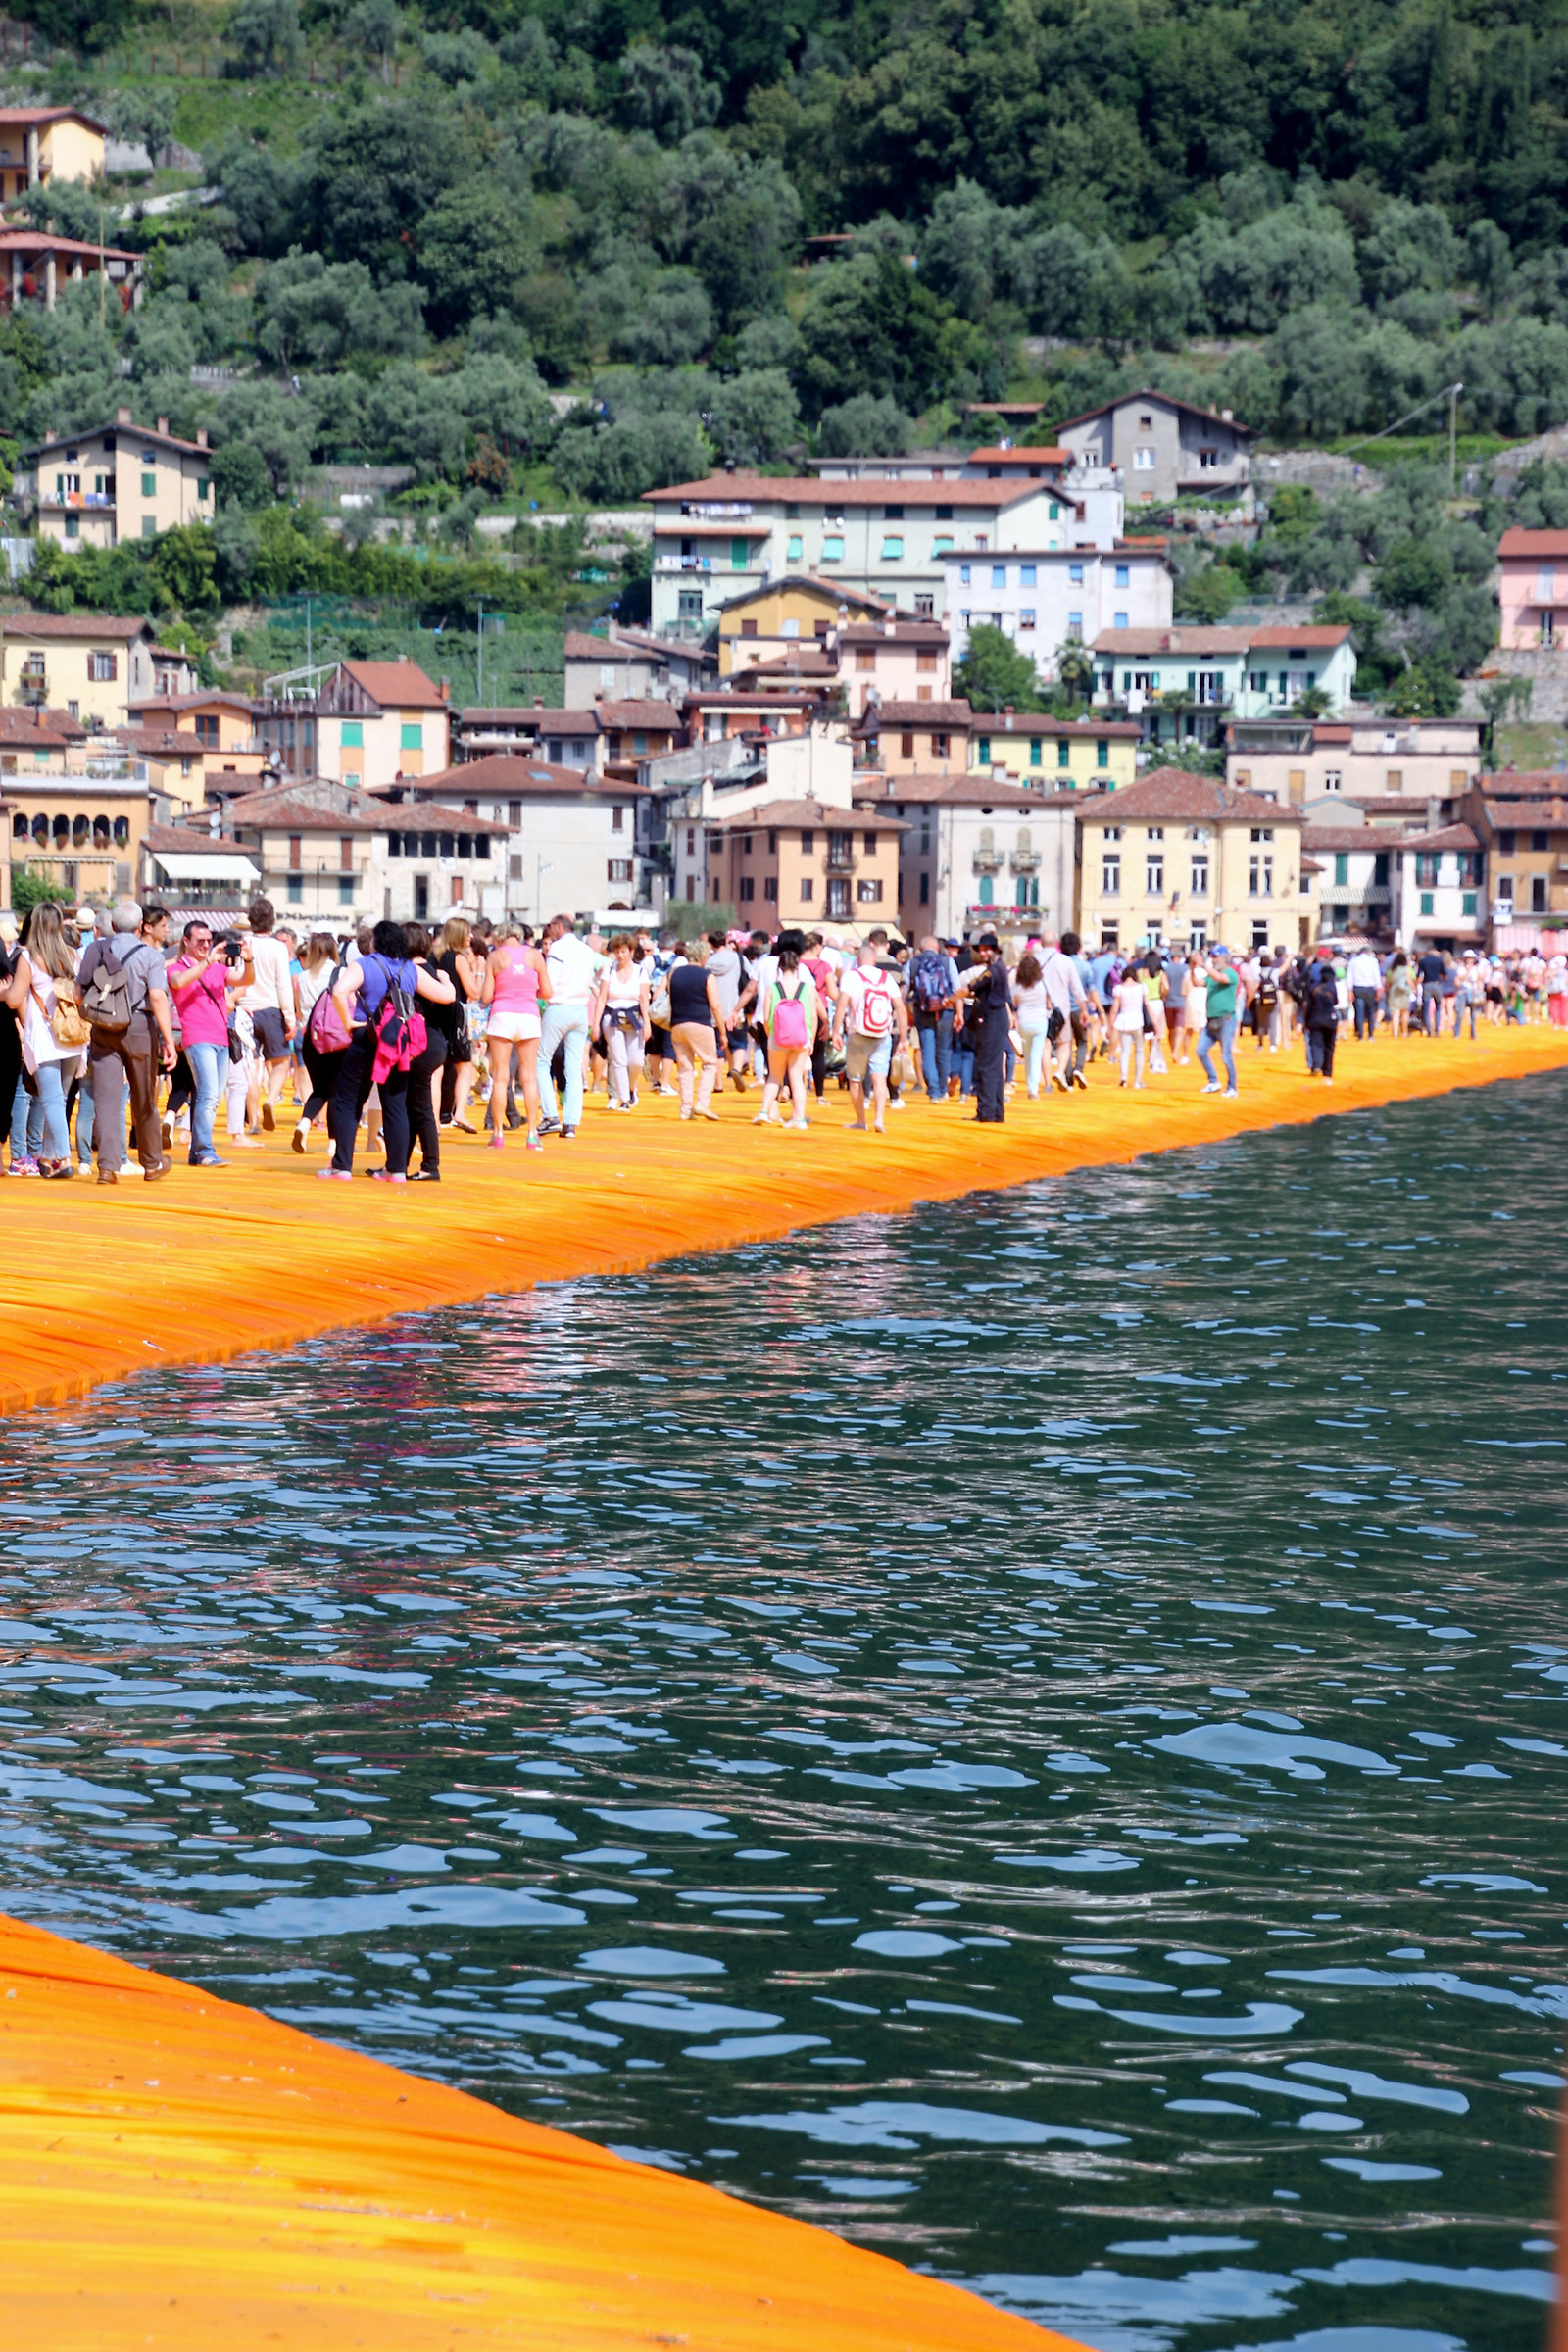 The Floating Piers...